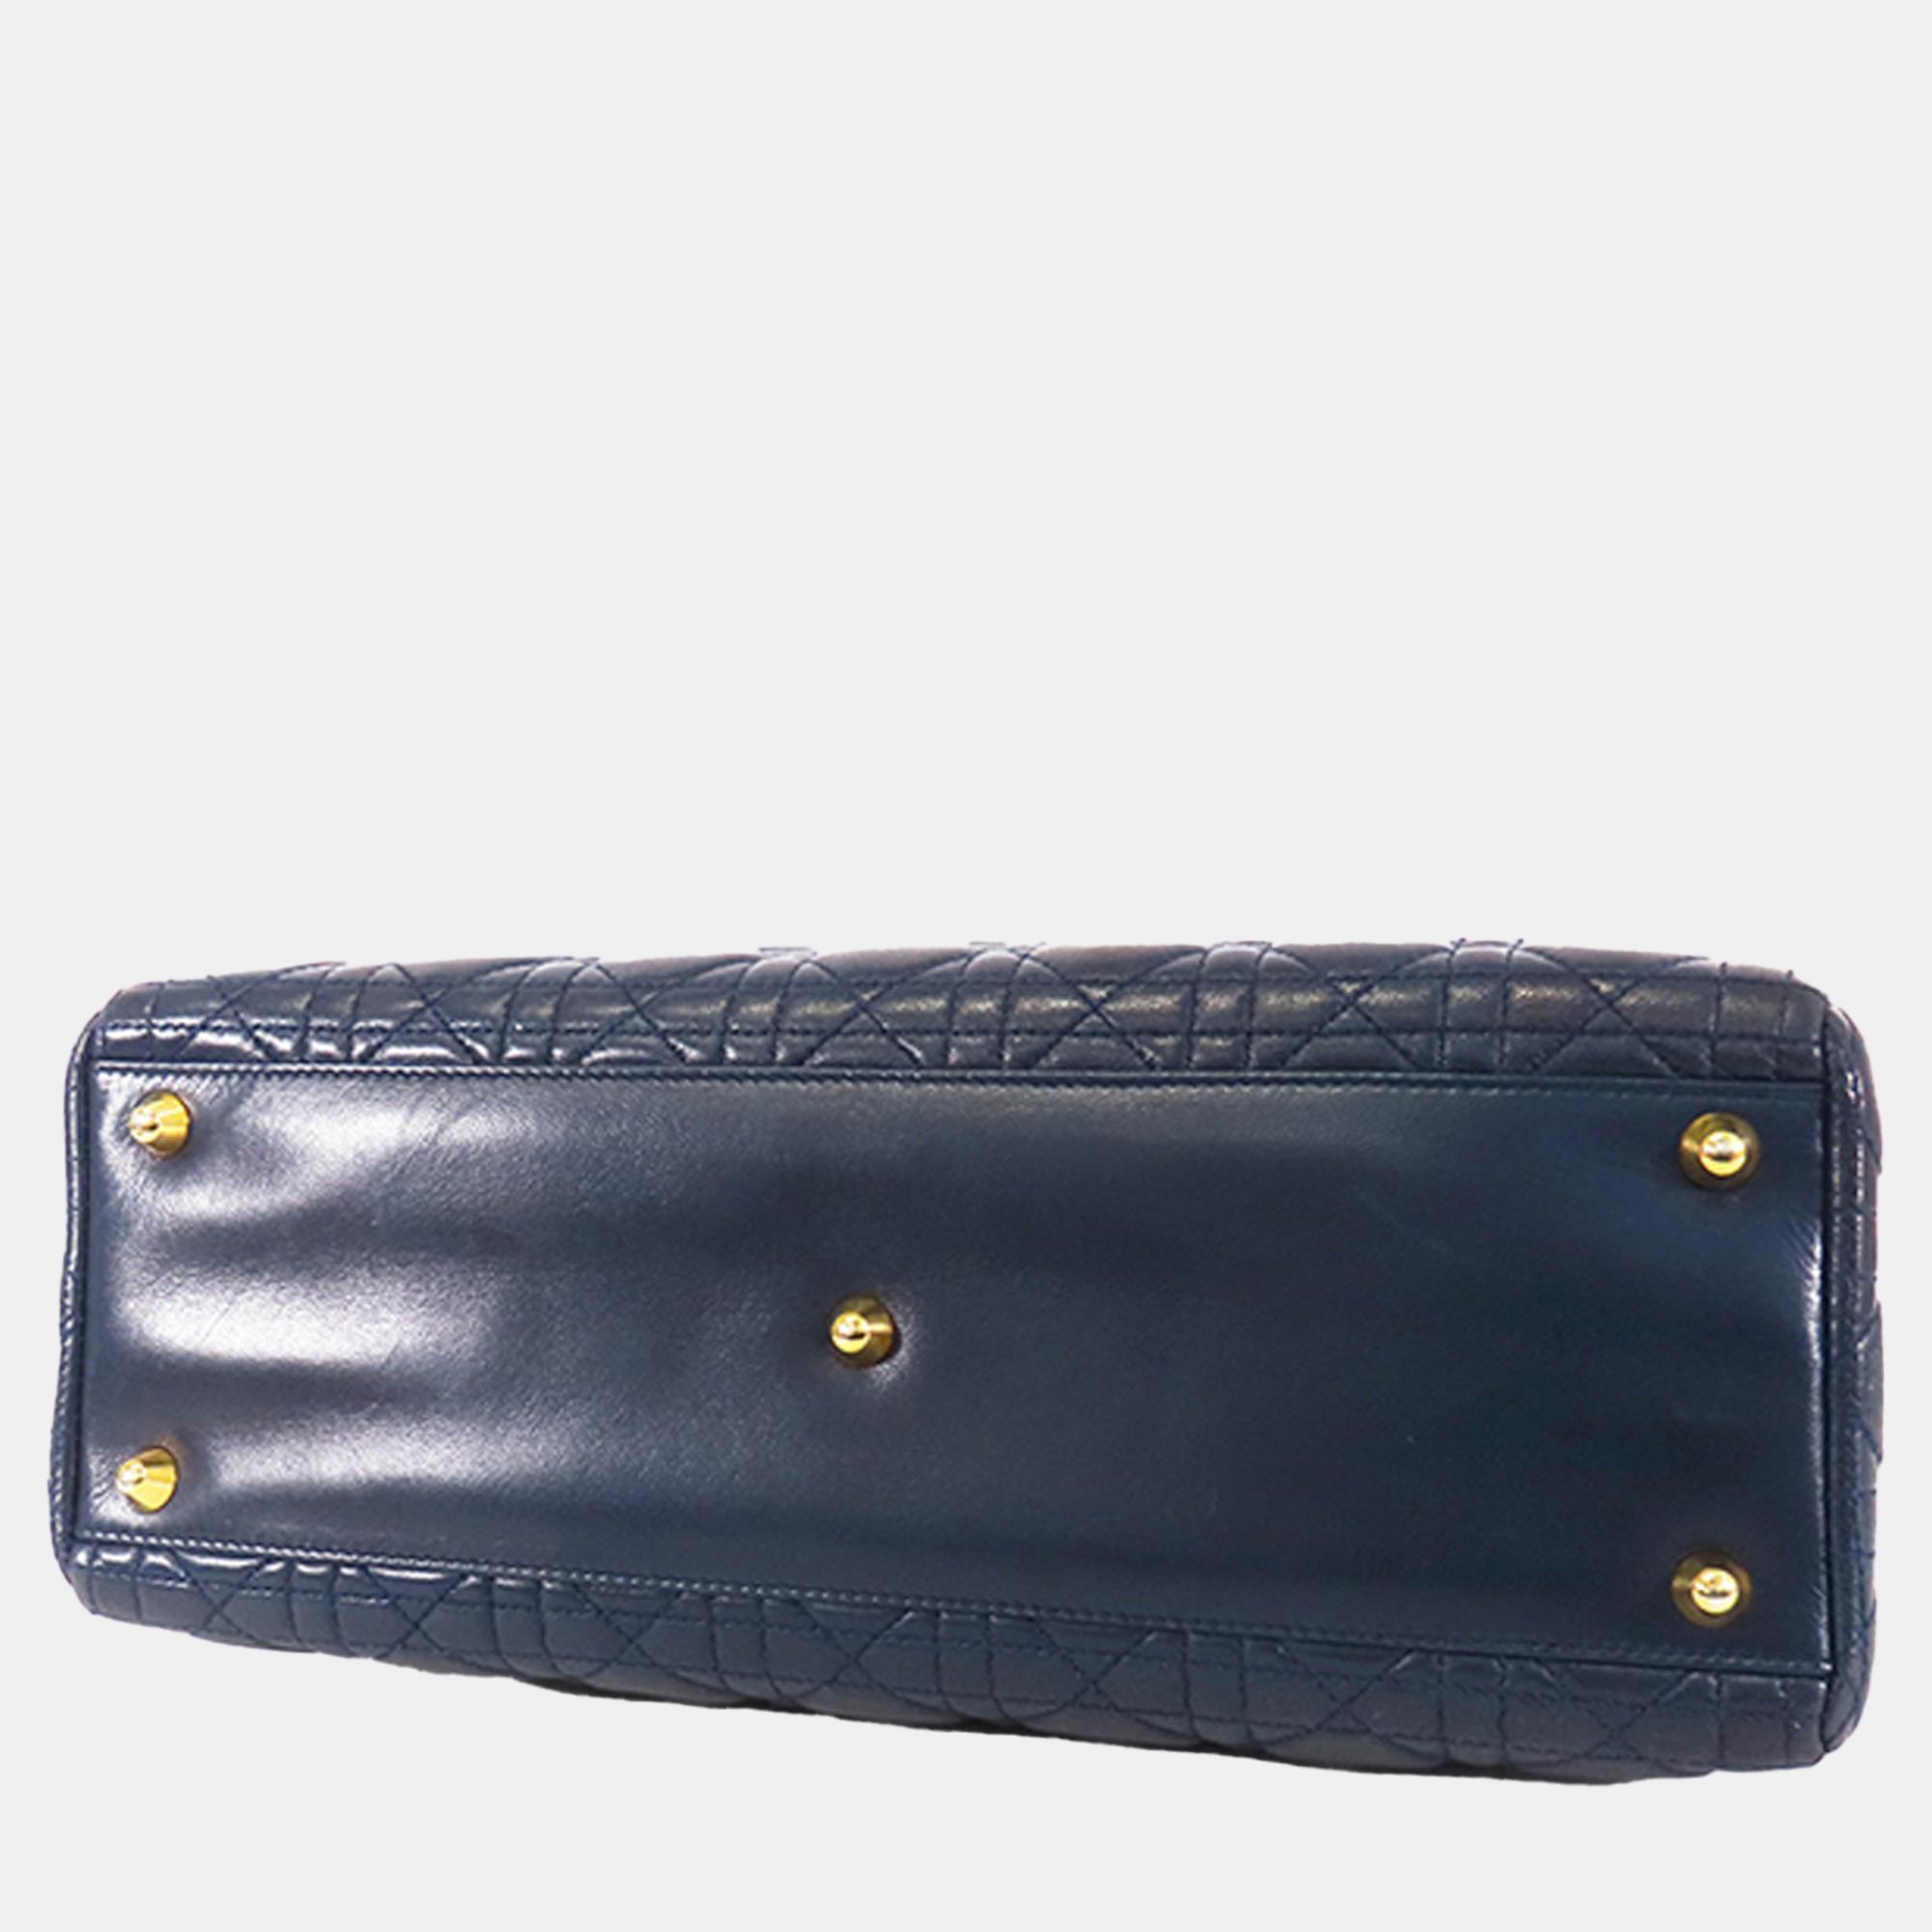 Dior Navy Blue Large Lambskin Cannage Lady Dior